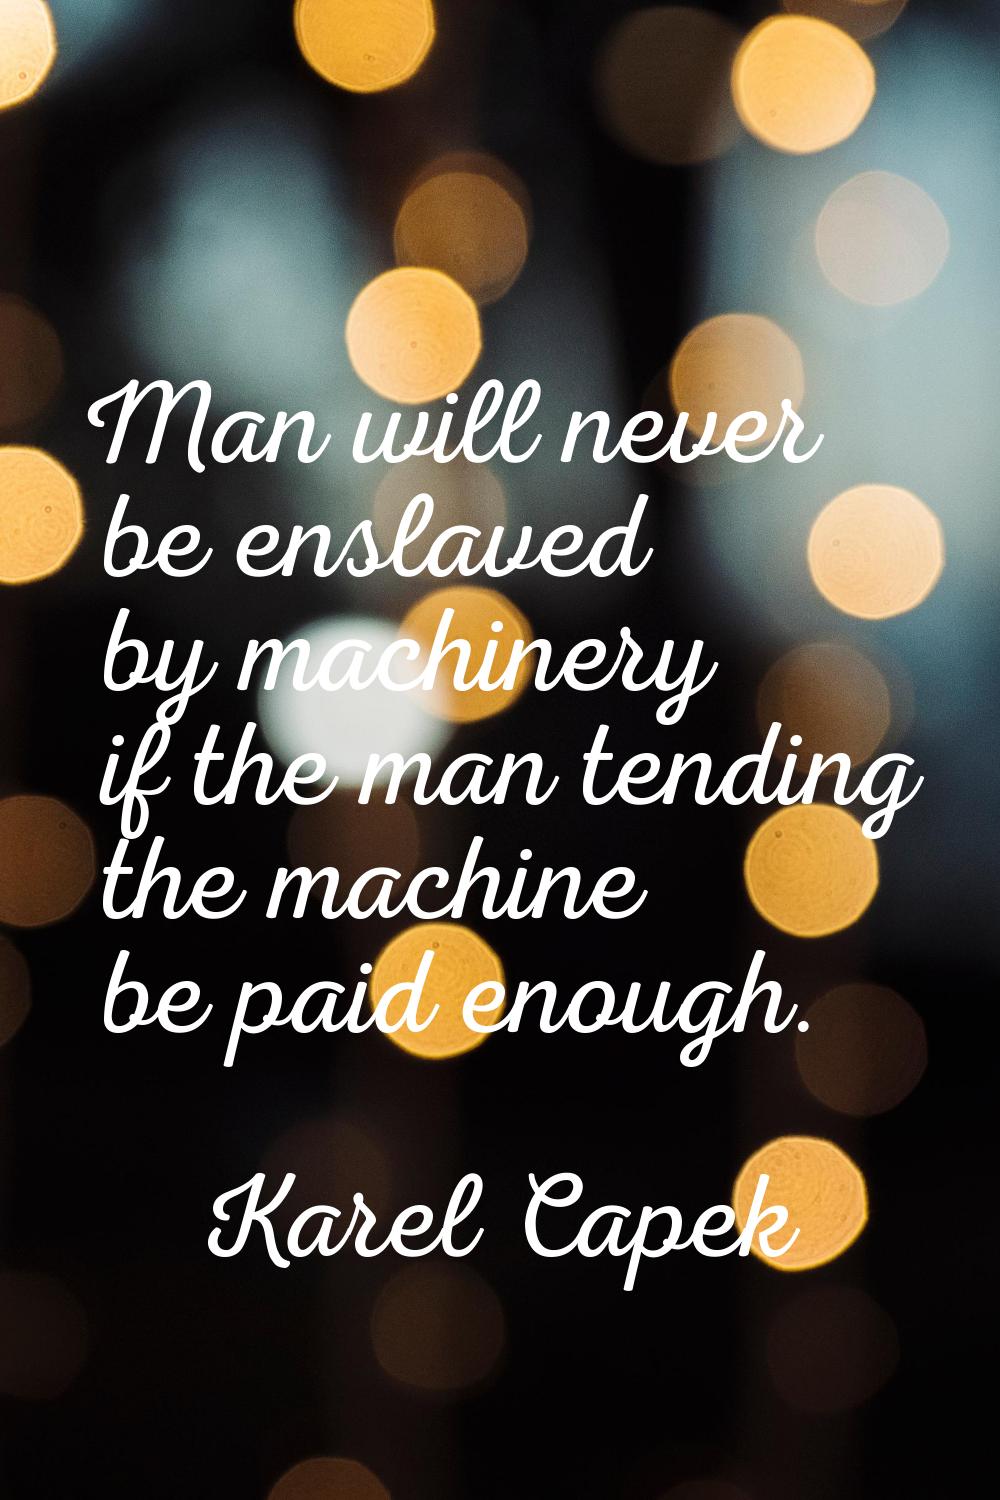 Man will never be enslaved by machinery if the man tending the machine be paid enough.